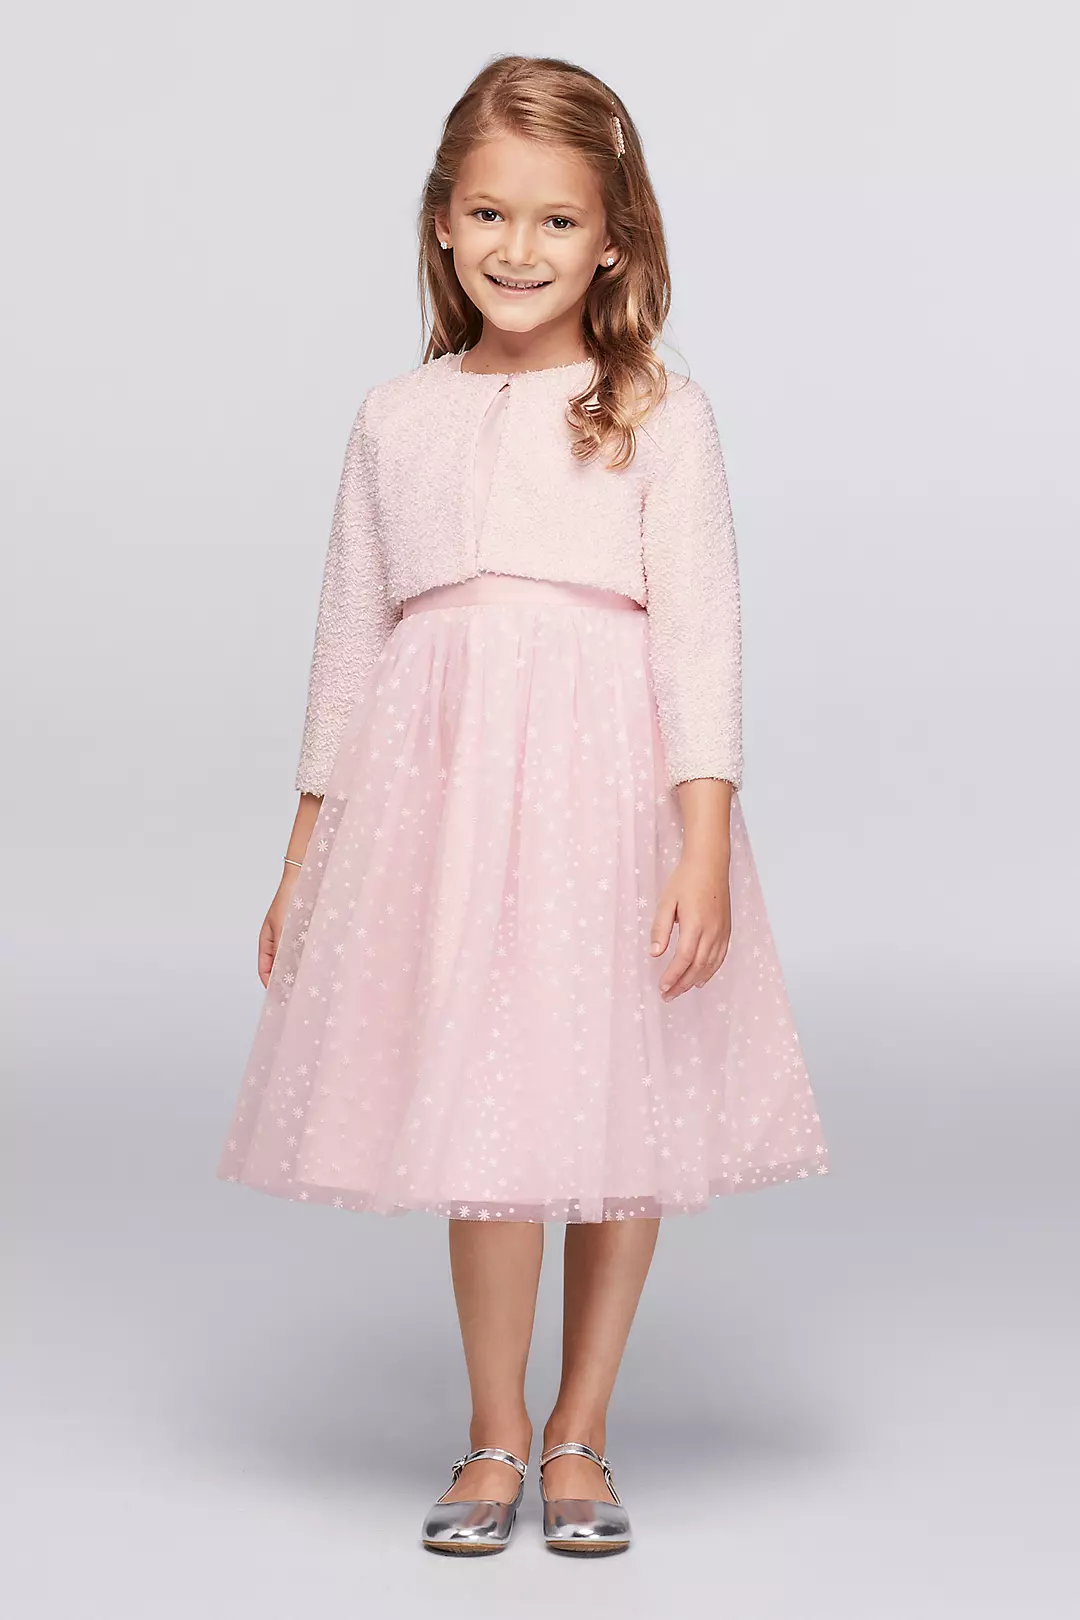 Snowflake Tulle Dress with Fuzzy Cardigan Image